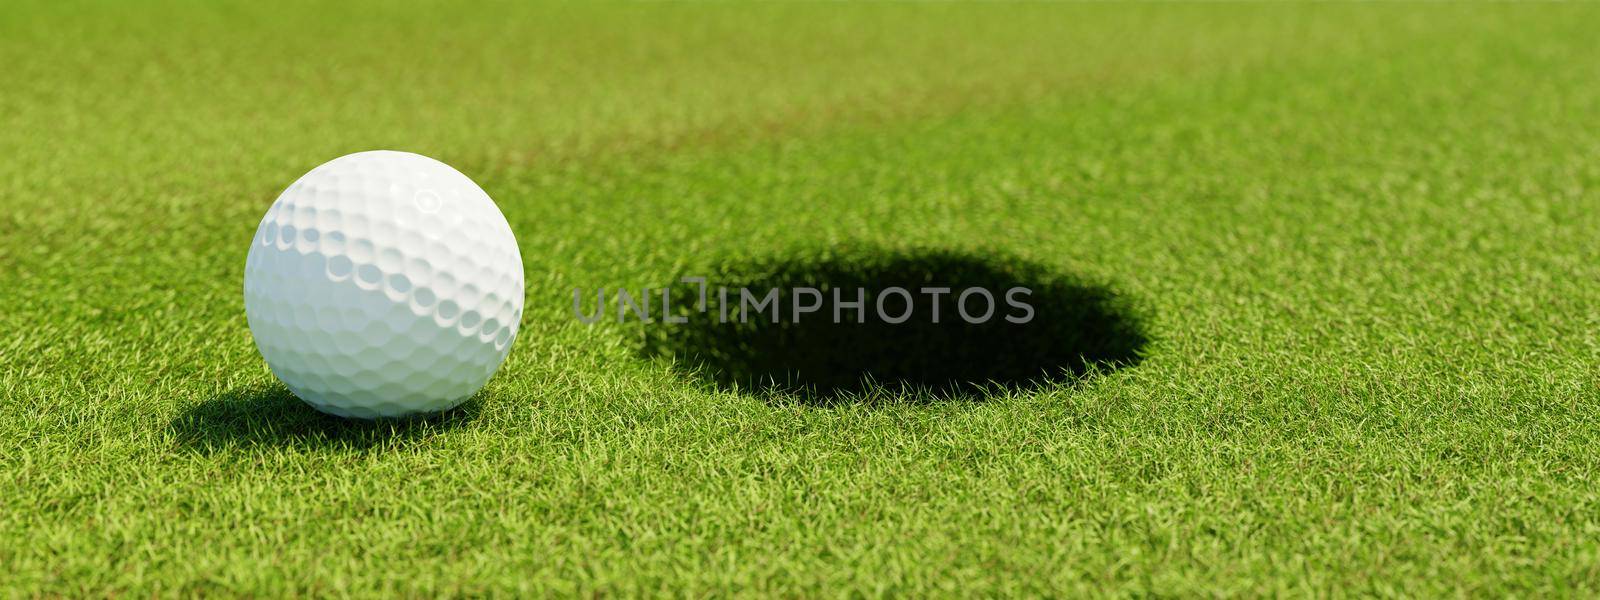 Golf ball on grass in fairway with hole on green background. Sport and athletic concept. 3D illustration rendering by MiniStocker